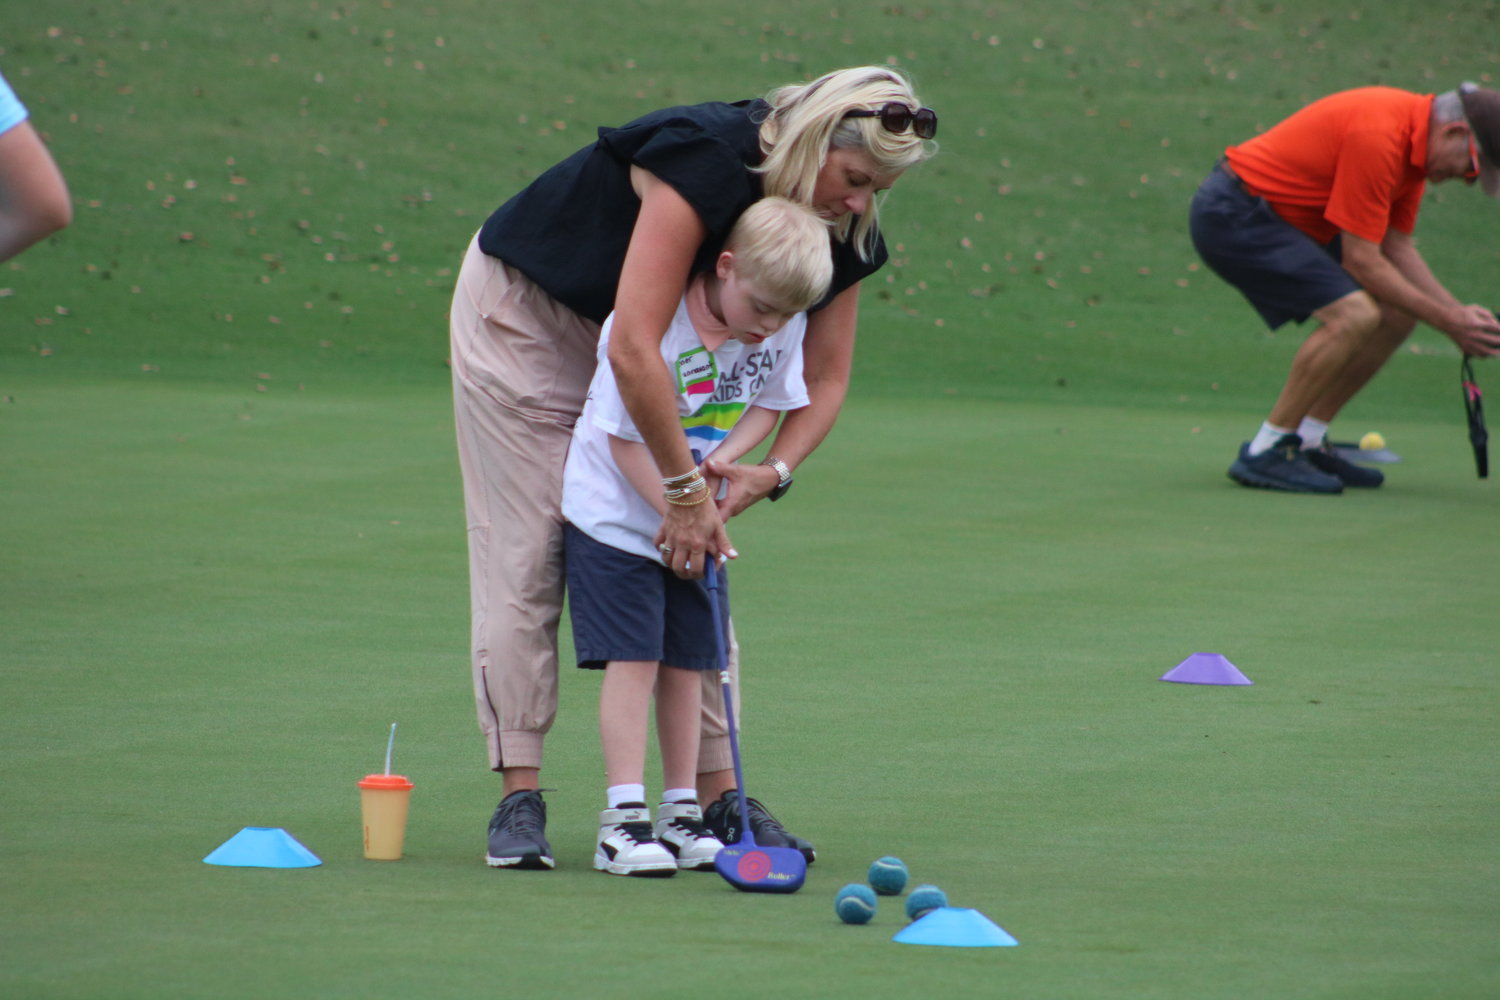 The clinic provided an opportunity to have fun for both participants and their families.